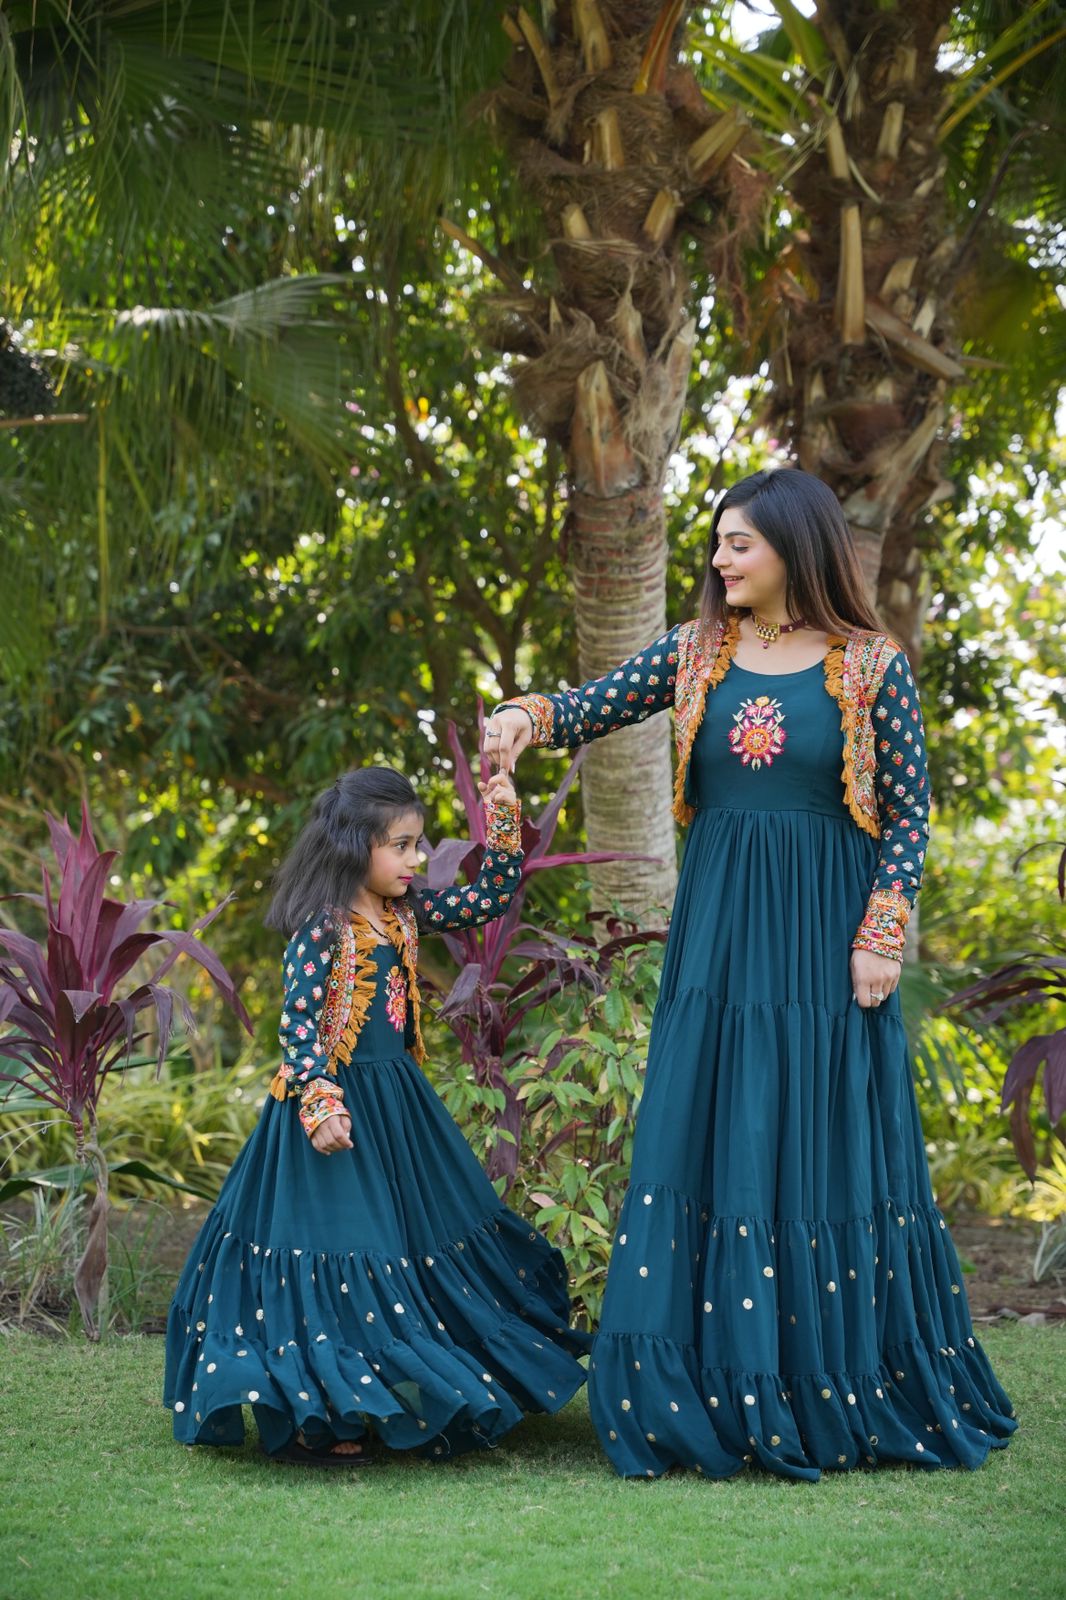 Amazing Teal Blue Color Mother Daughter Gown WIth Koti